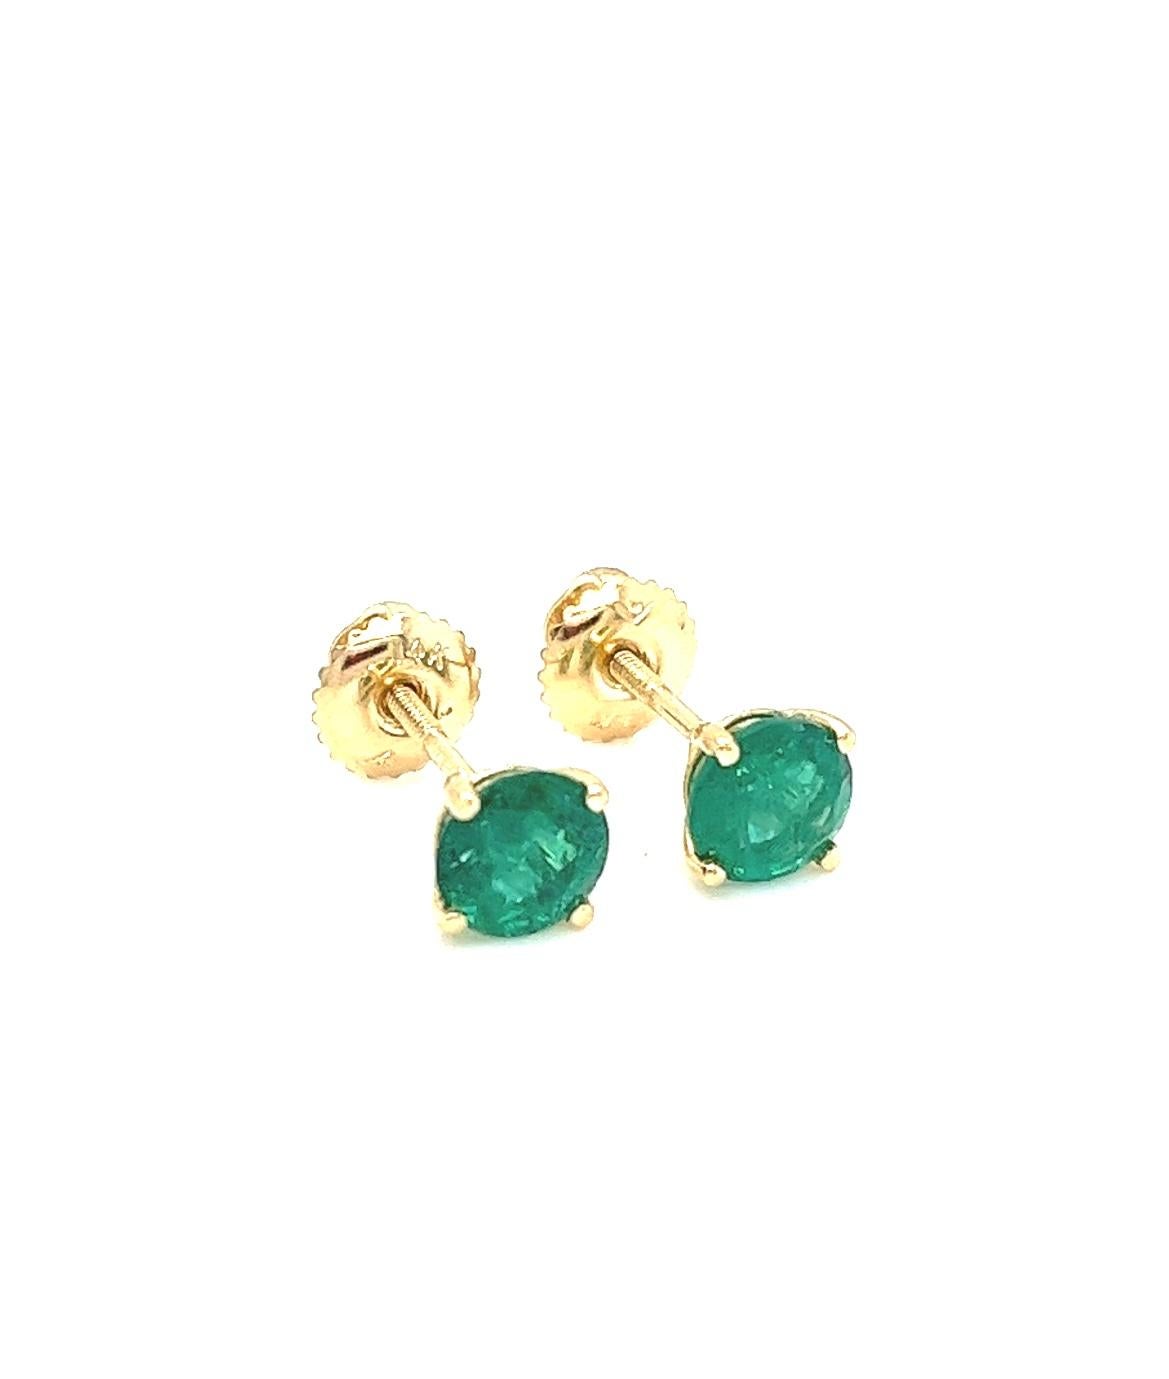 1.45 carats round Emerald Stud Earrings in 14K Yellow Gold. For Sale 1